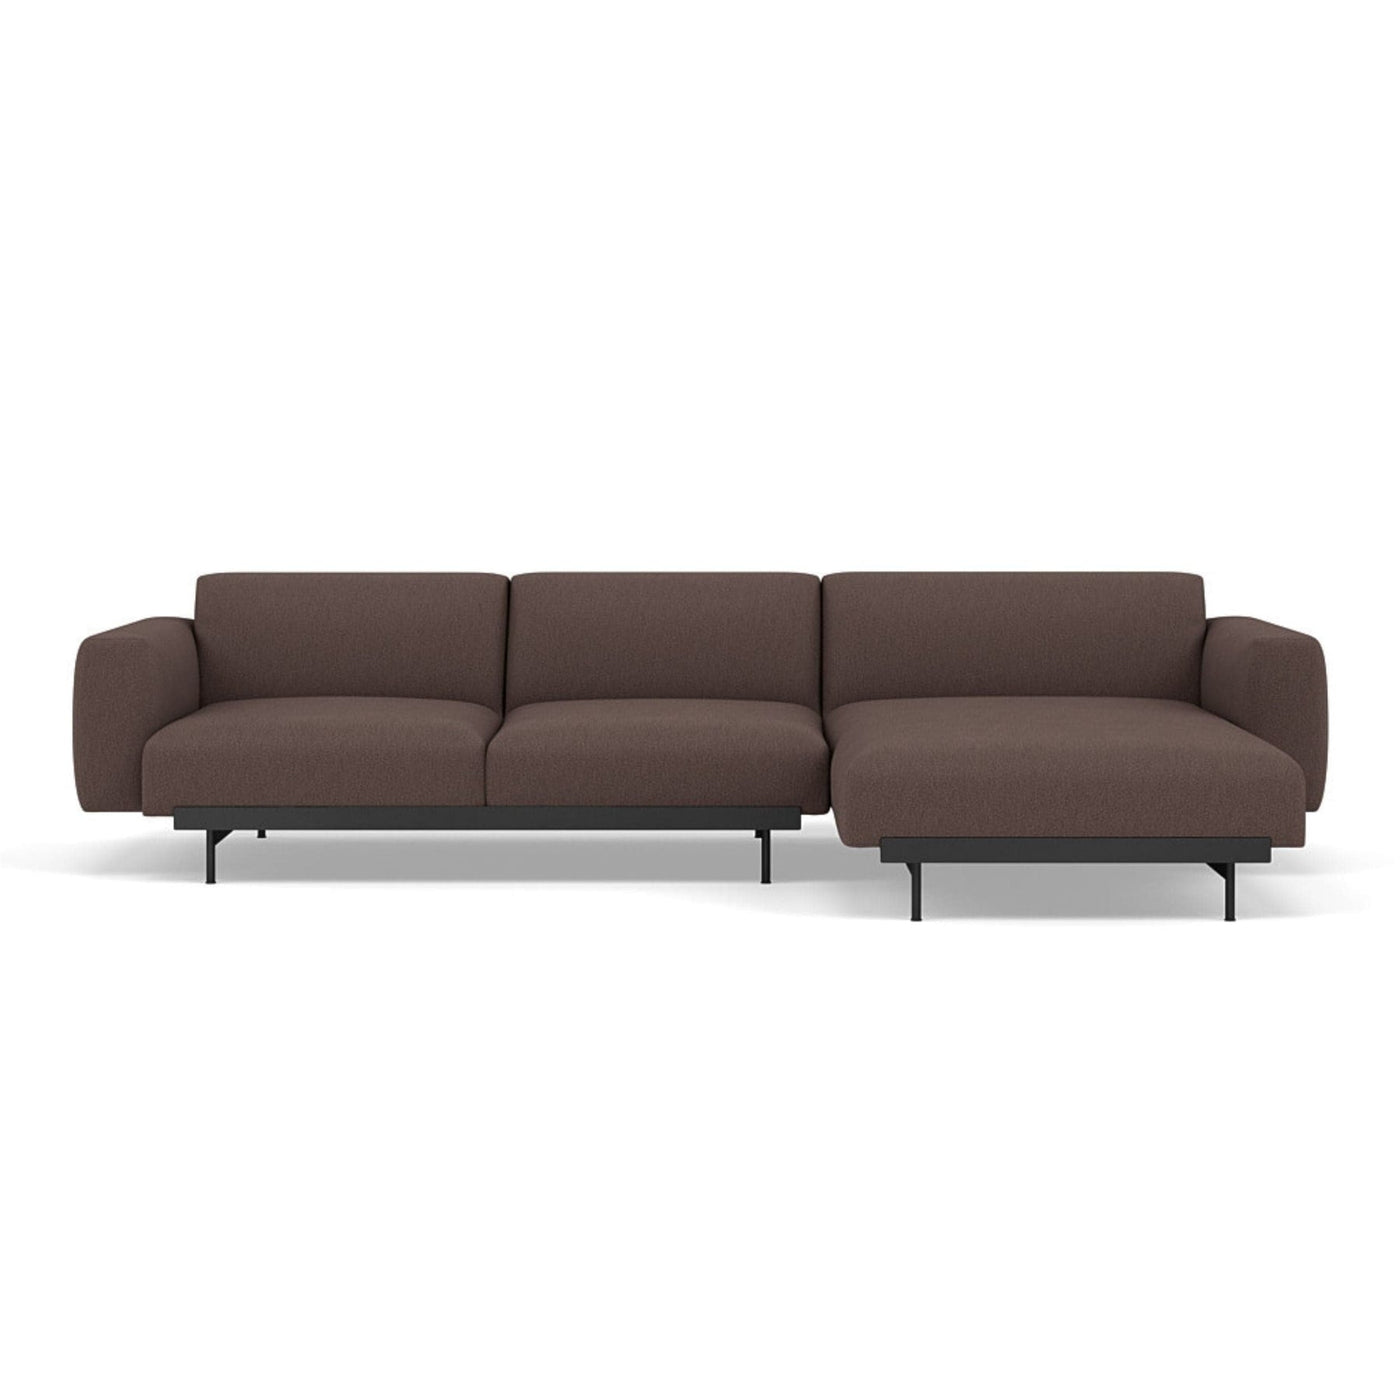 Muuto In Situ Sofa 3 seater configuration 6 in clay 6 fabric. Made to order at someday designs. #colour_clay-6-red-brown